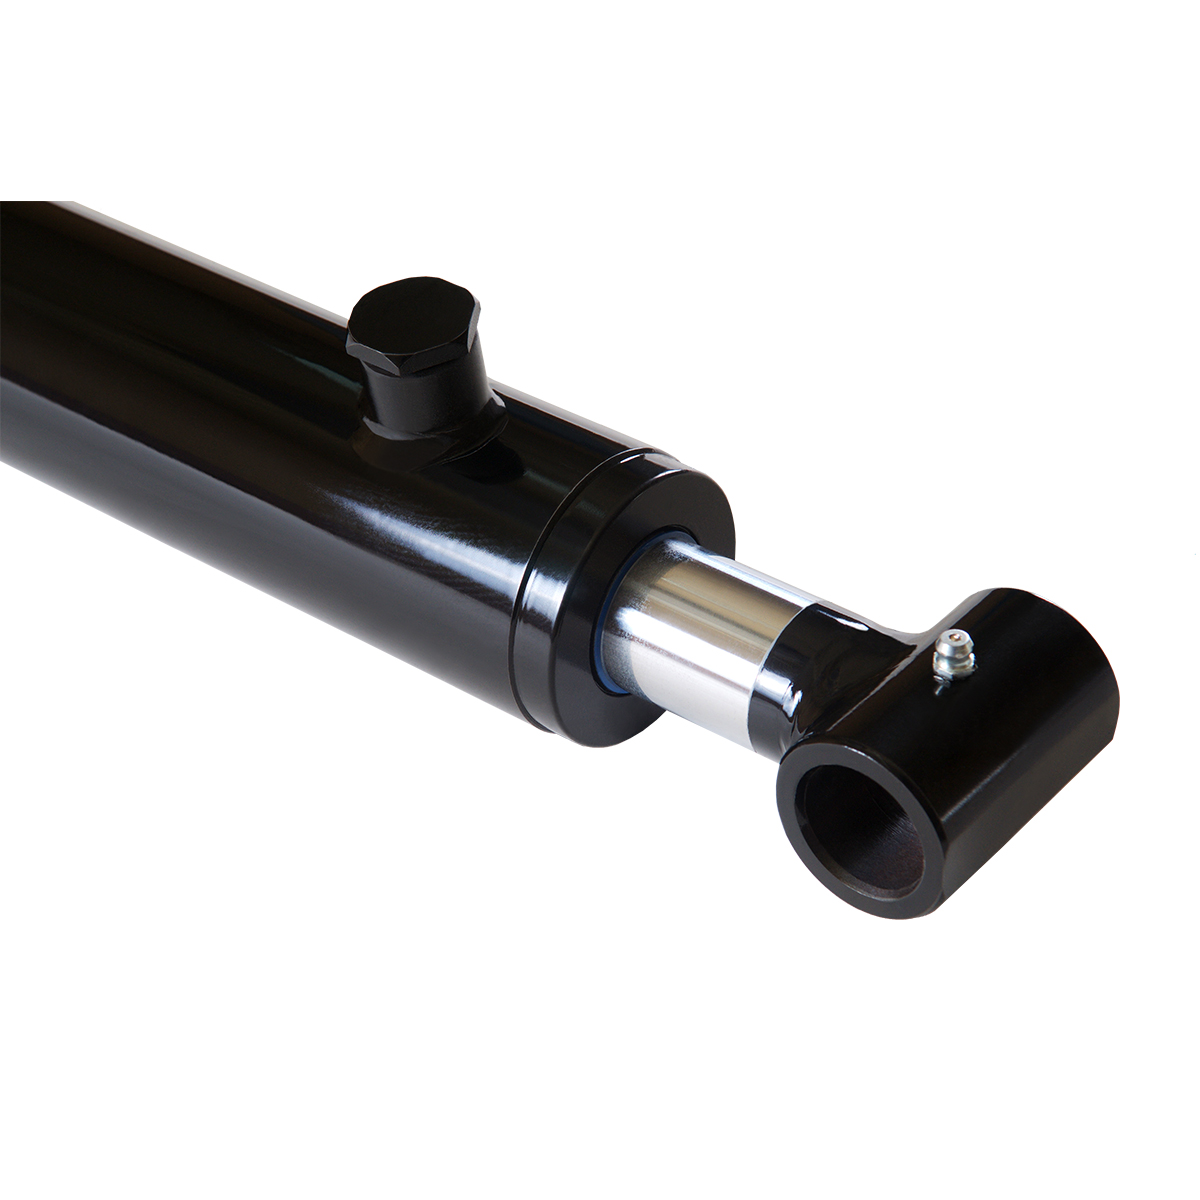 2 bore x 22 stroke hydraulic cylinder, welded cross tube double acting cylinder | Magister Hydraulics